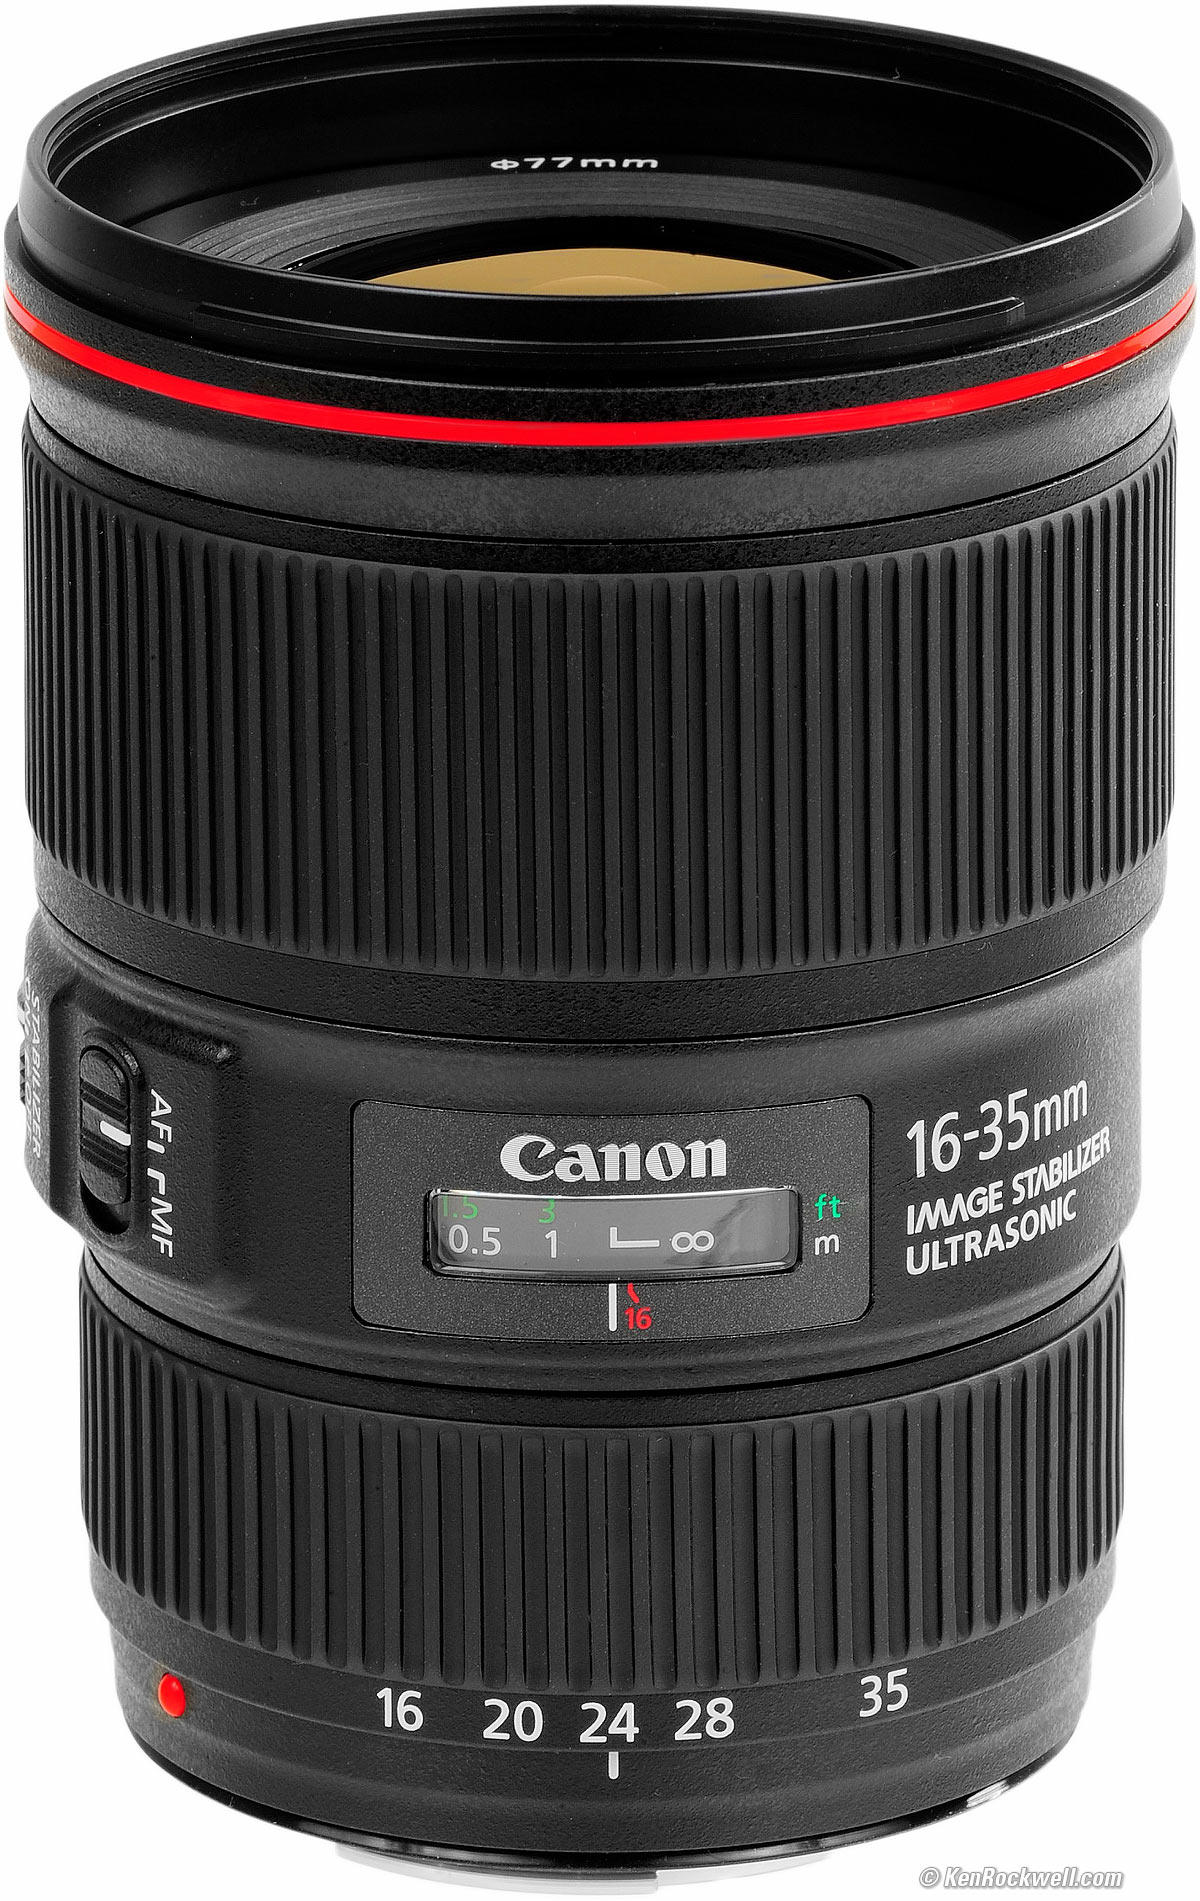 Canon EF 16-35mm f/4 L IS USM Review & Sample Images by Ken